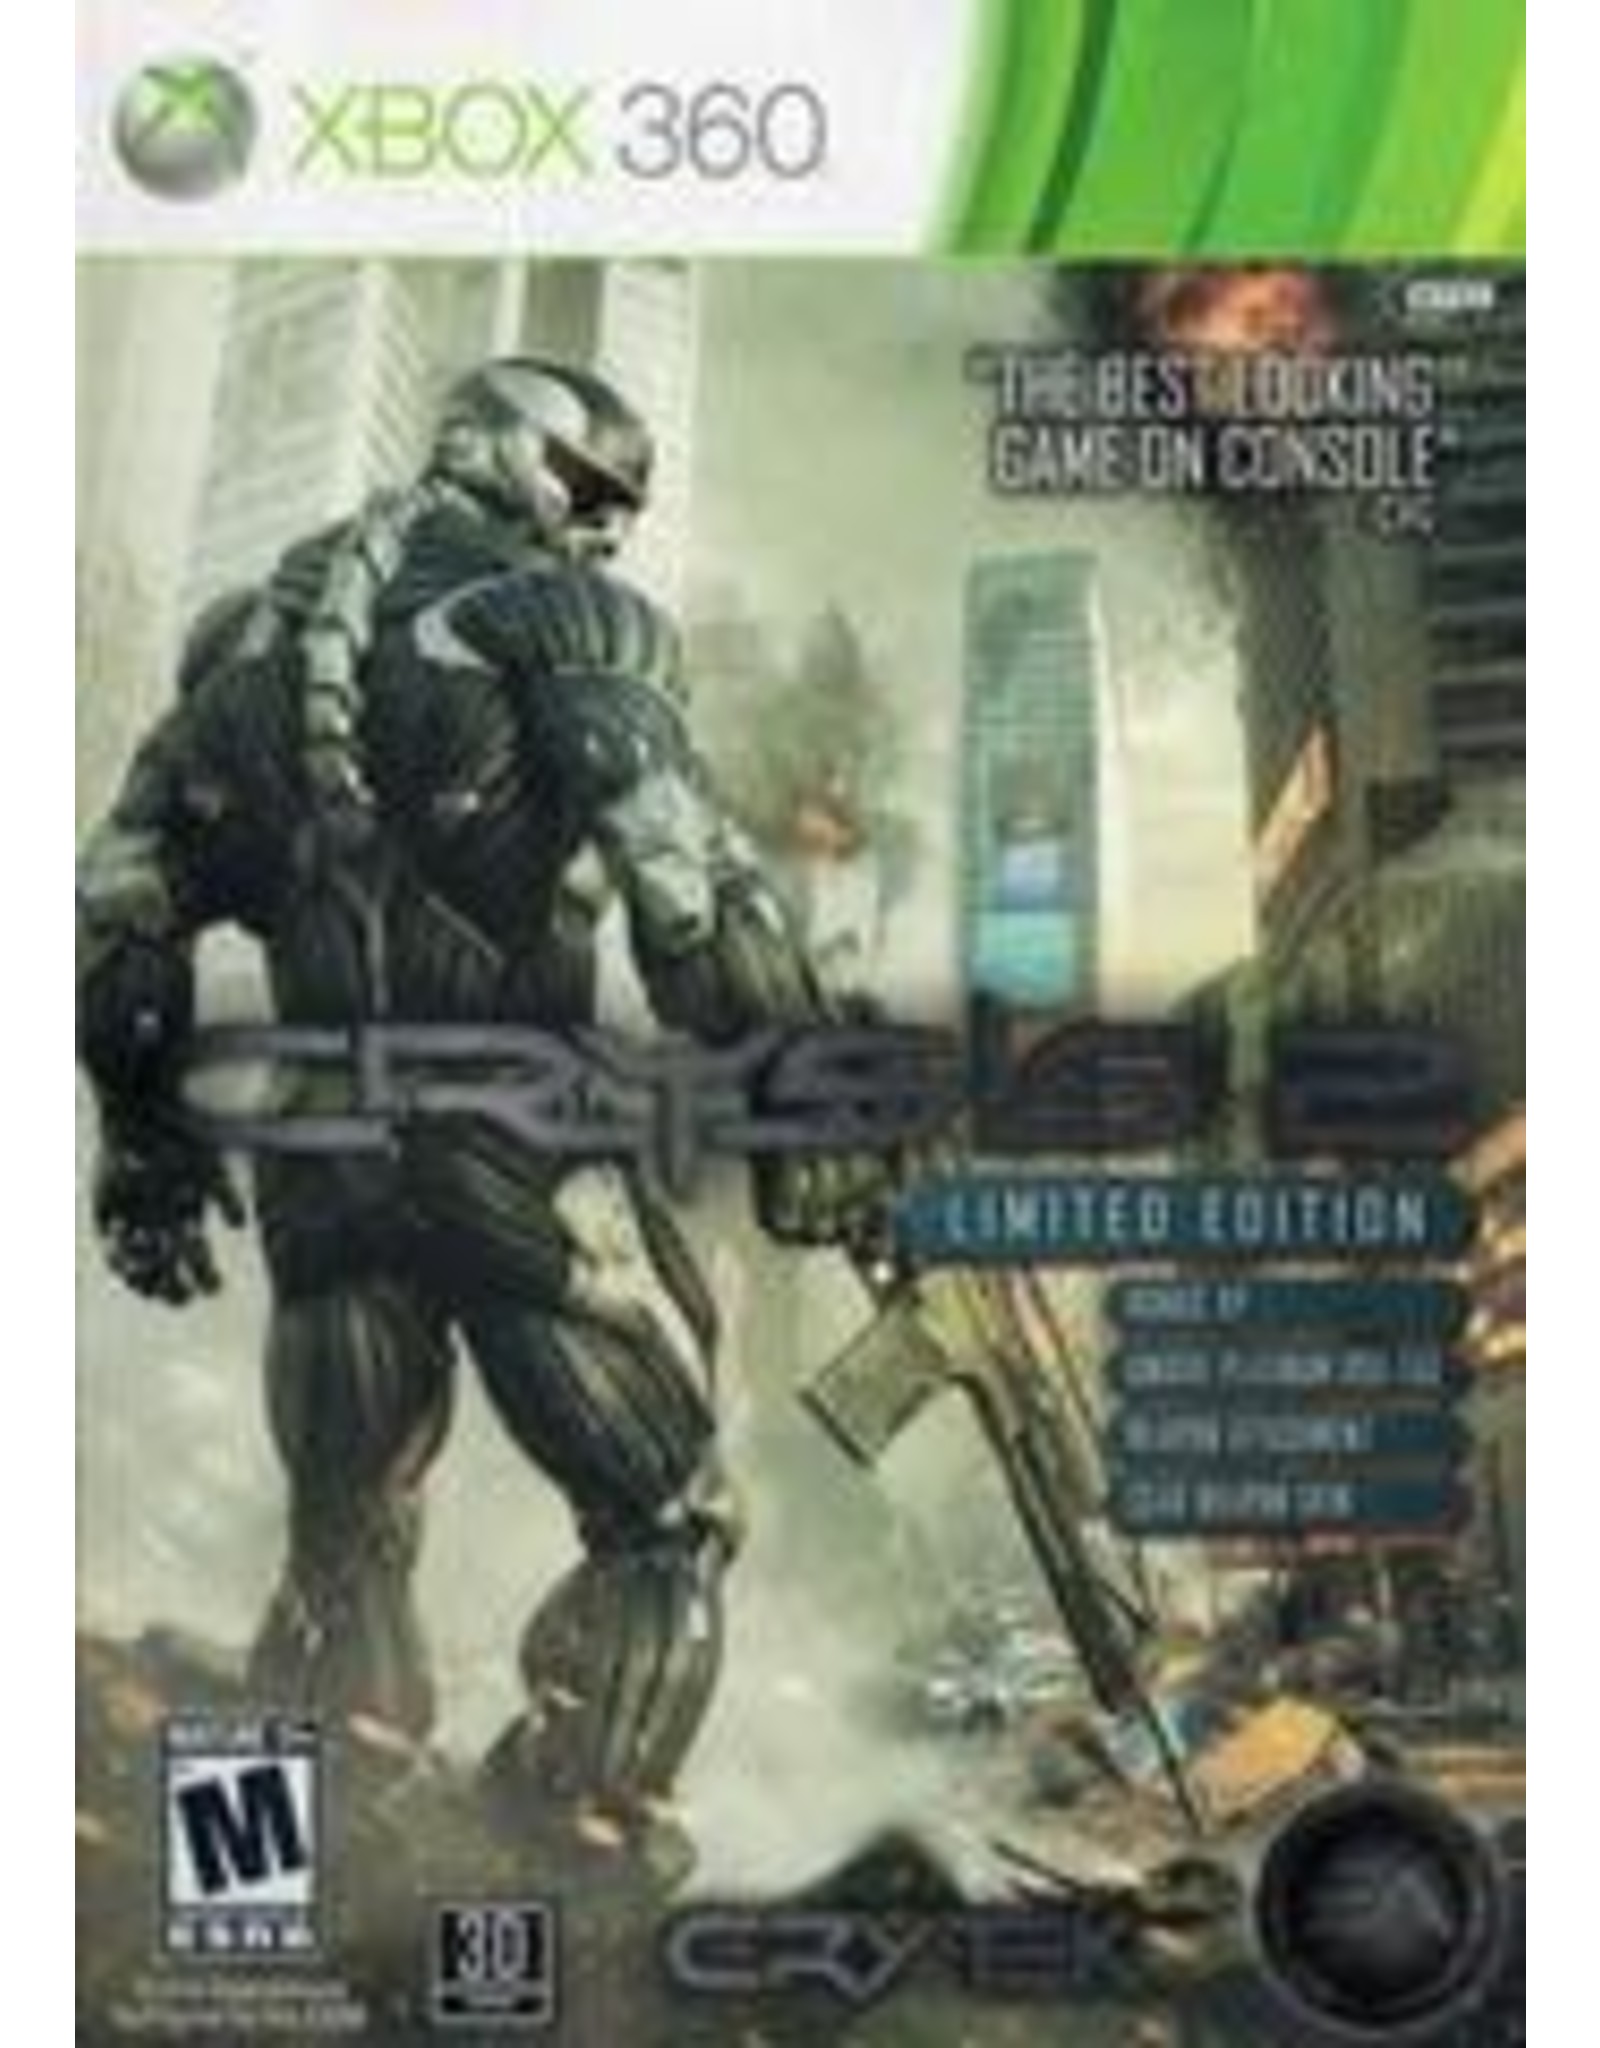 Xbox 360 Crysis 2: Limited Edition - No DLC (Used)